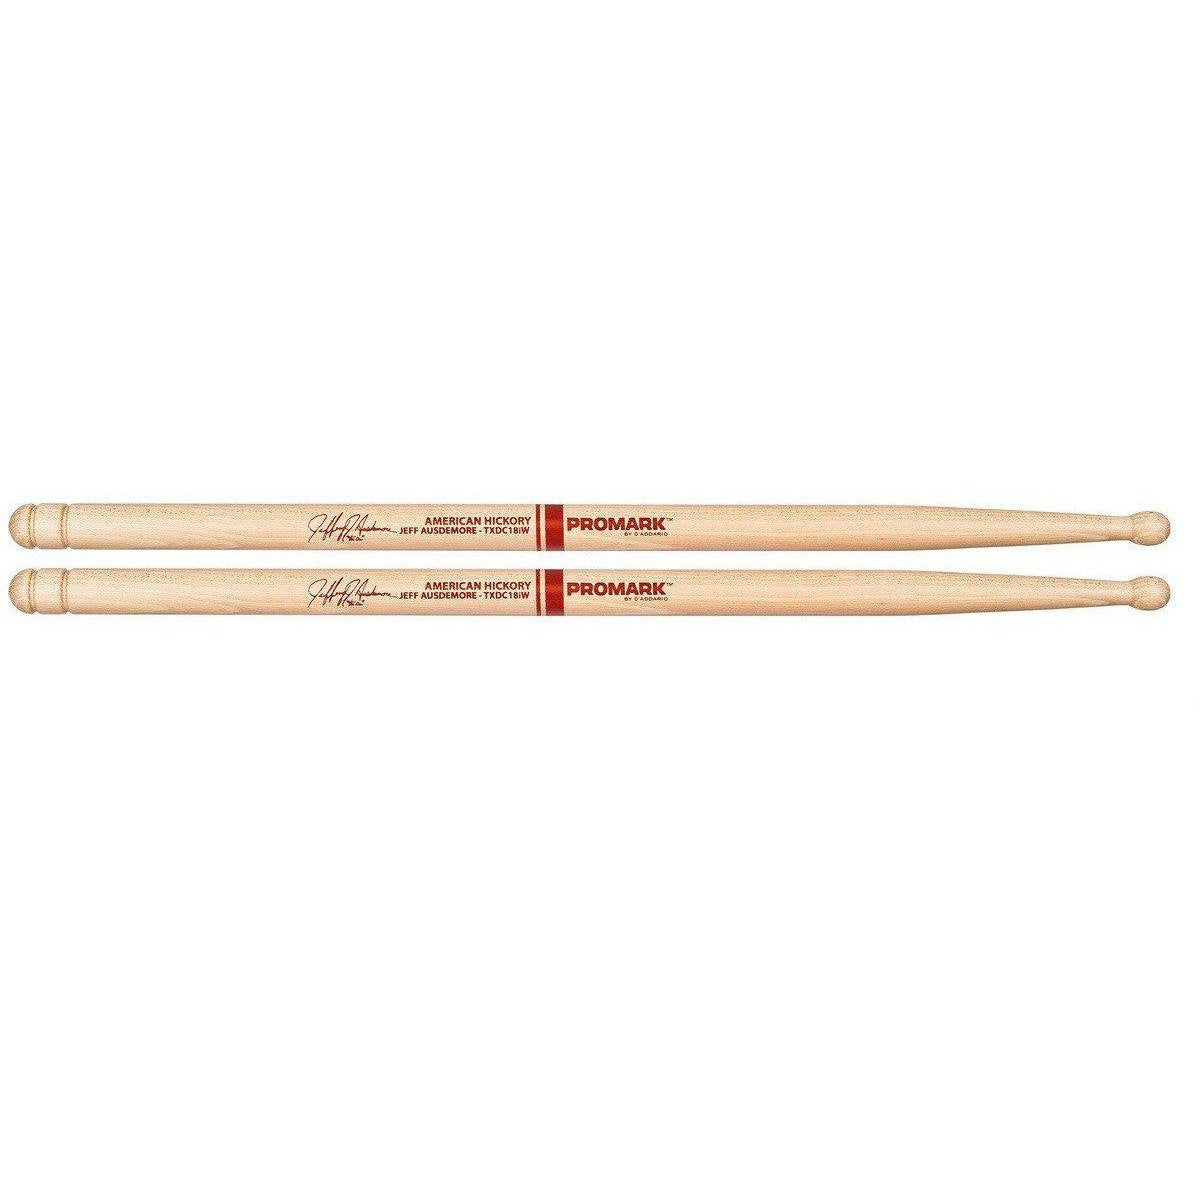 Jeff Ausdemore DC18 LIGHT Signature Hickory Wood Tip Drumstick - TXDC18IW-Andy's Music